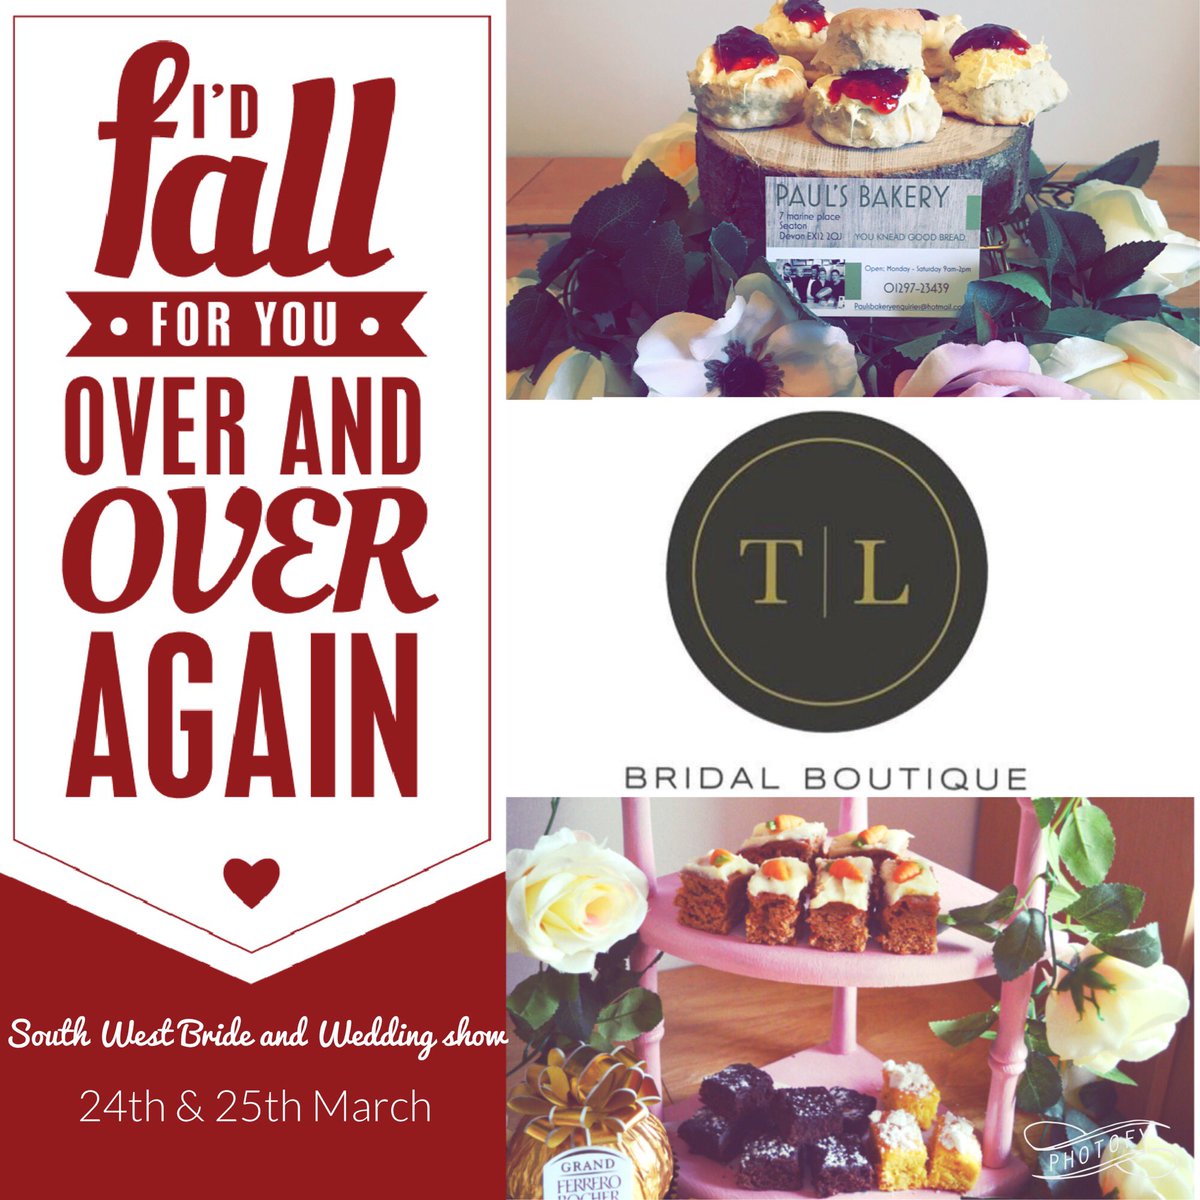 If you’re heading to the @BrideWedShow @WestpointExeter stop by @TLbridal to see their utterly stunning wedding dresses and have a little treat from #paulsbakery ❤️👰#devonbakes #bridalboutique #southwestbrides #weddinginspo #devon #bridewedshow2018